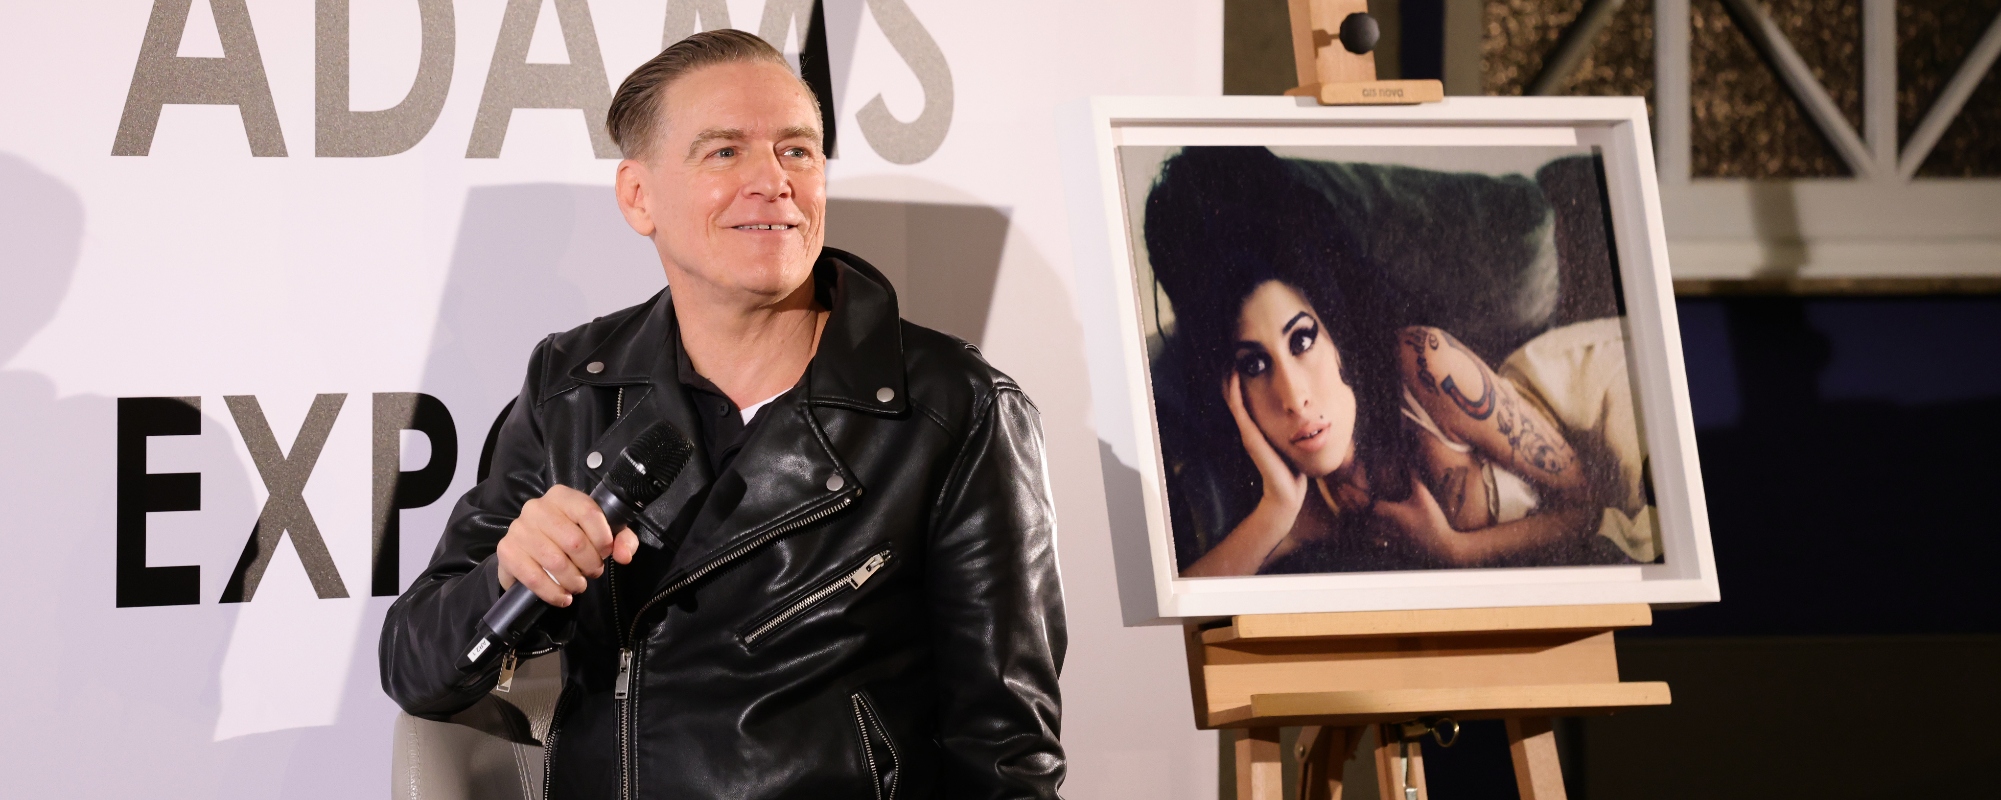 “I Tried to Help”: Bryan Adams Opens Up About Amy Winehouse Friendship